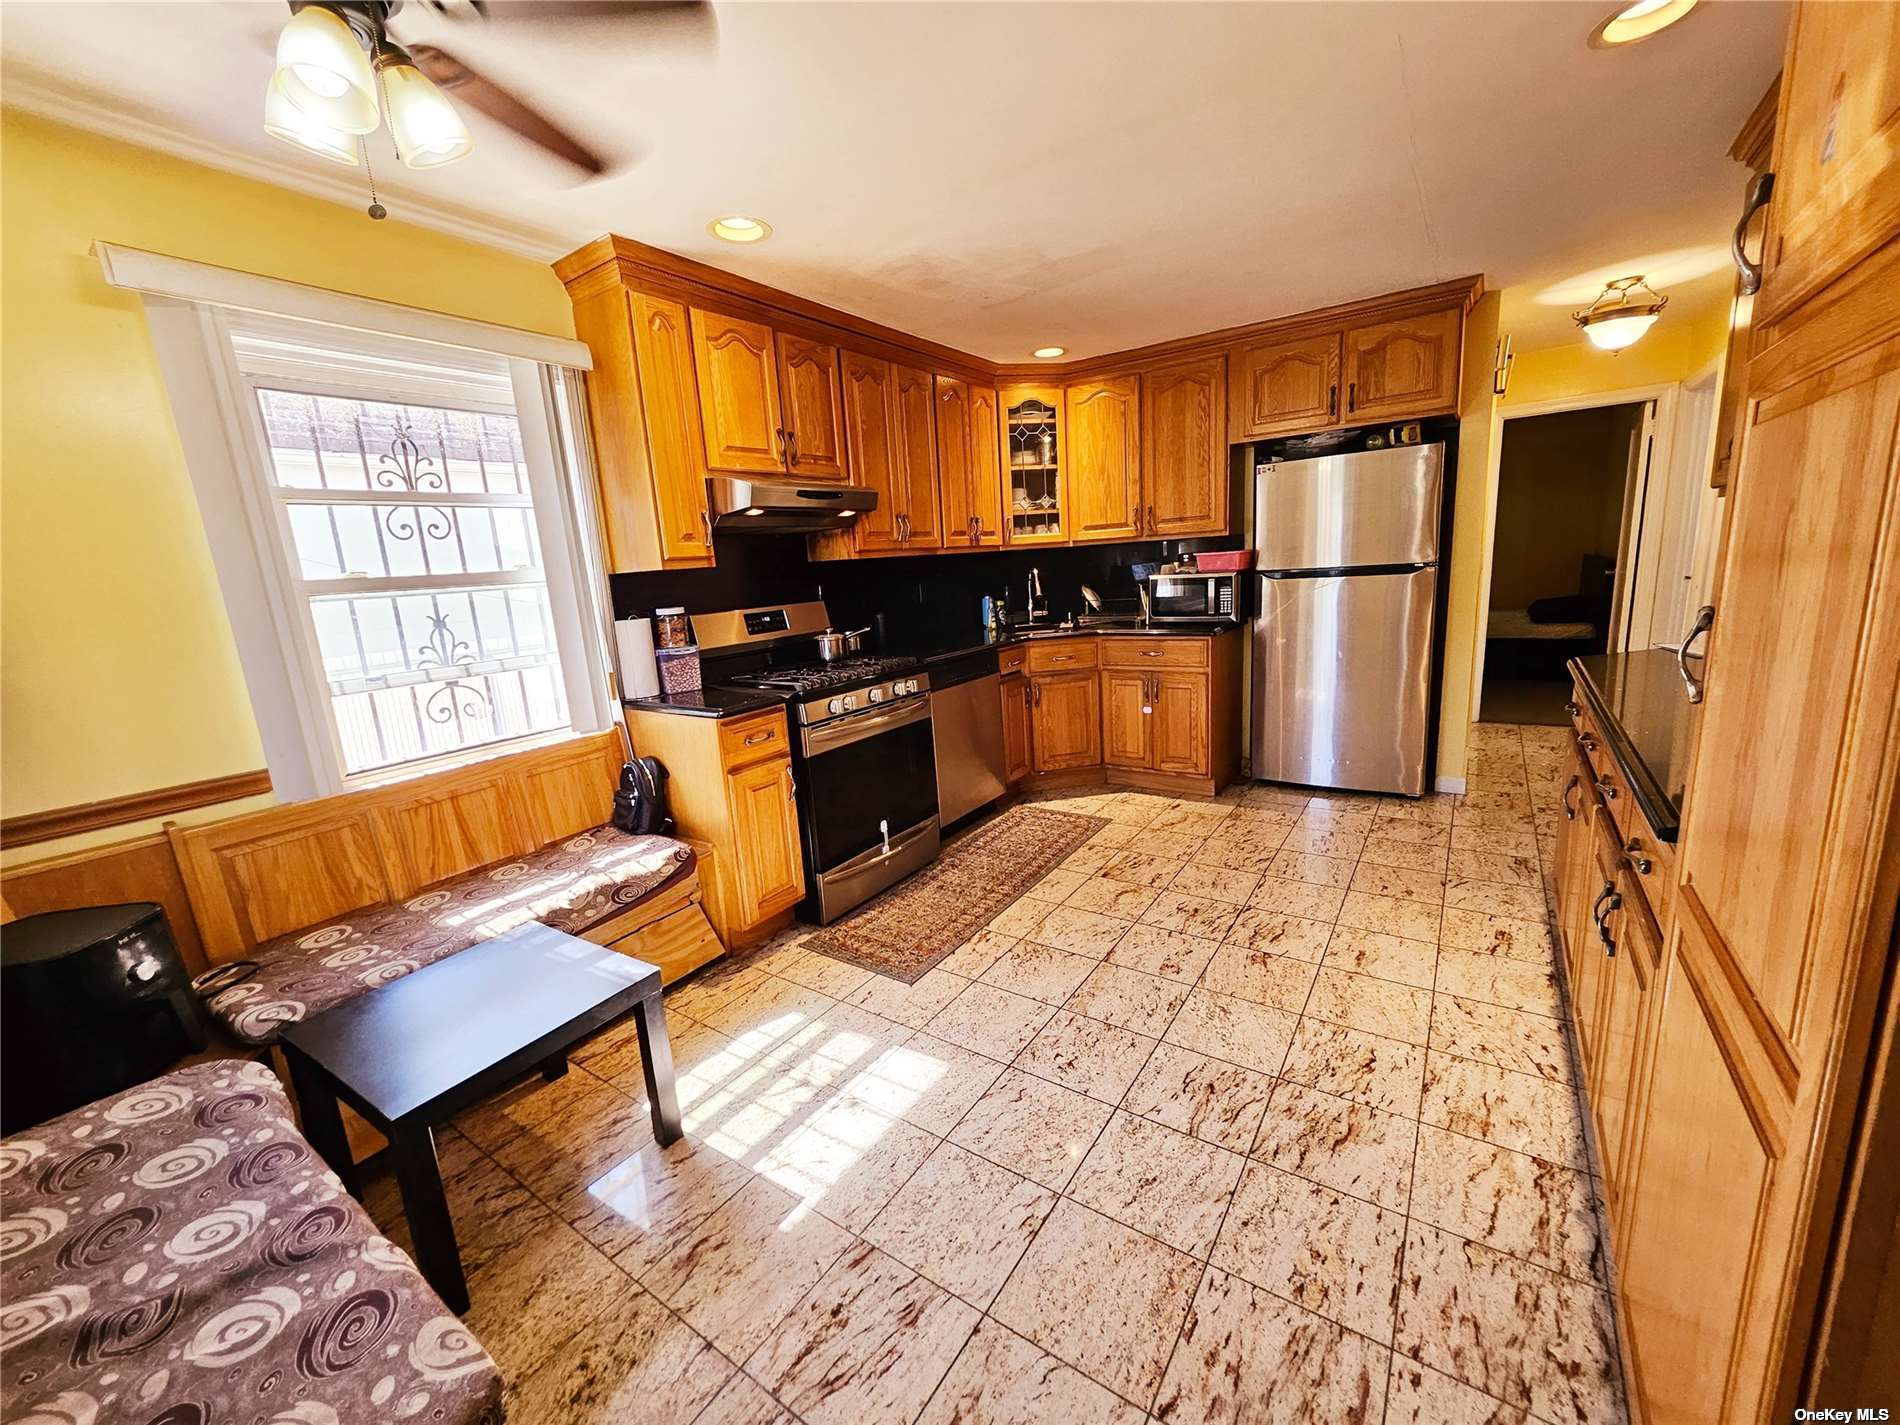 a large kitchen with stainless steel appliances kitchen island granite countertop a refrigerator and a stove top oven